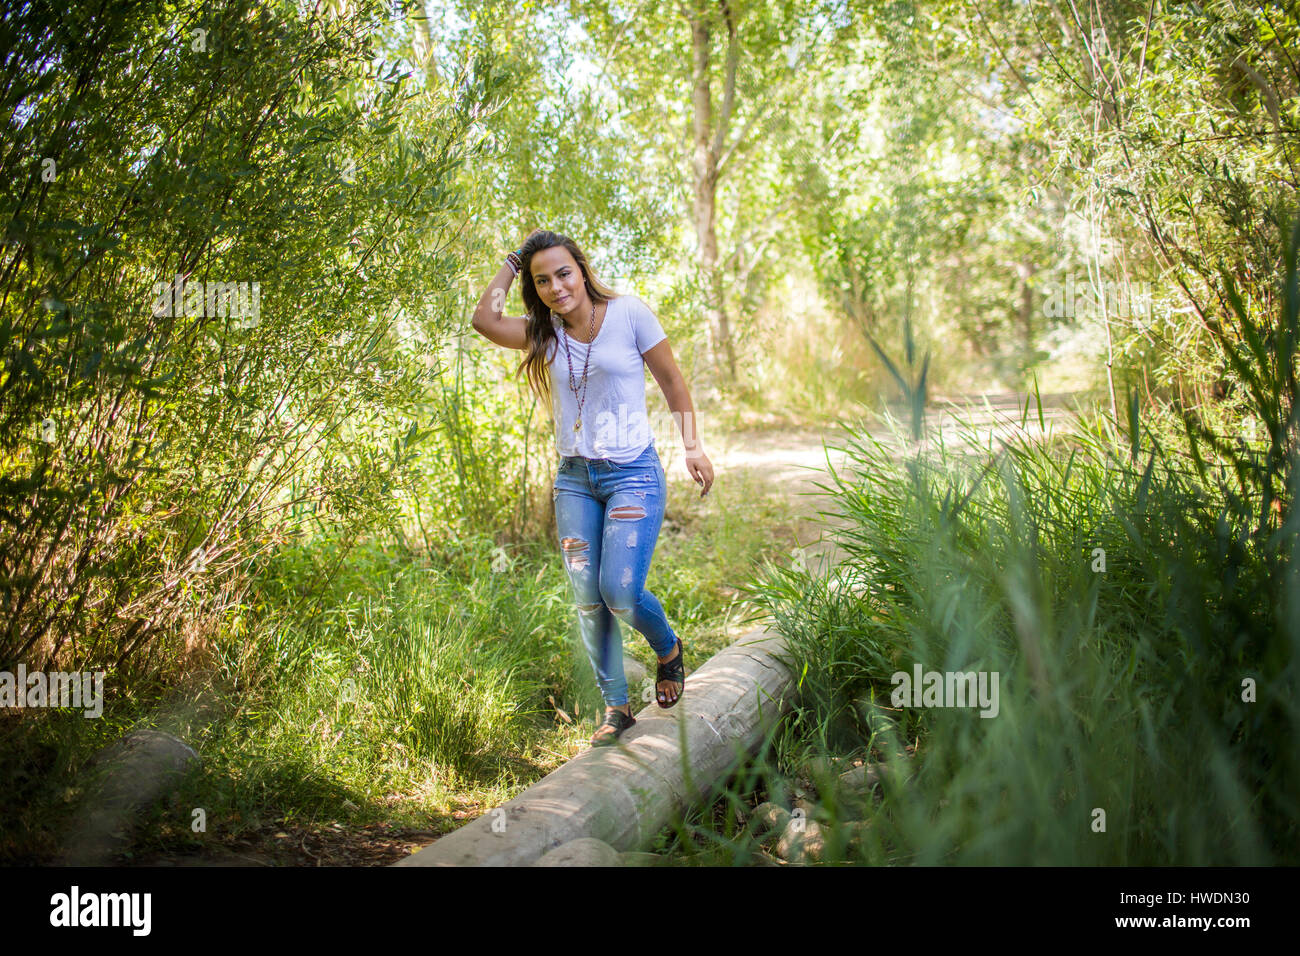 Portrait of teenage girl stepping across log in woodland Stock Photo